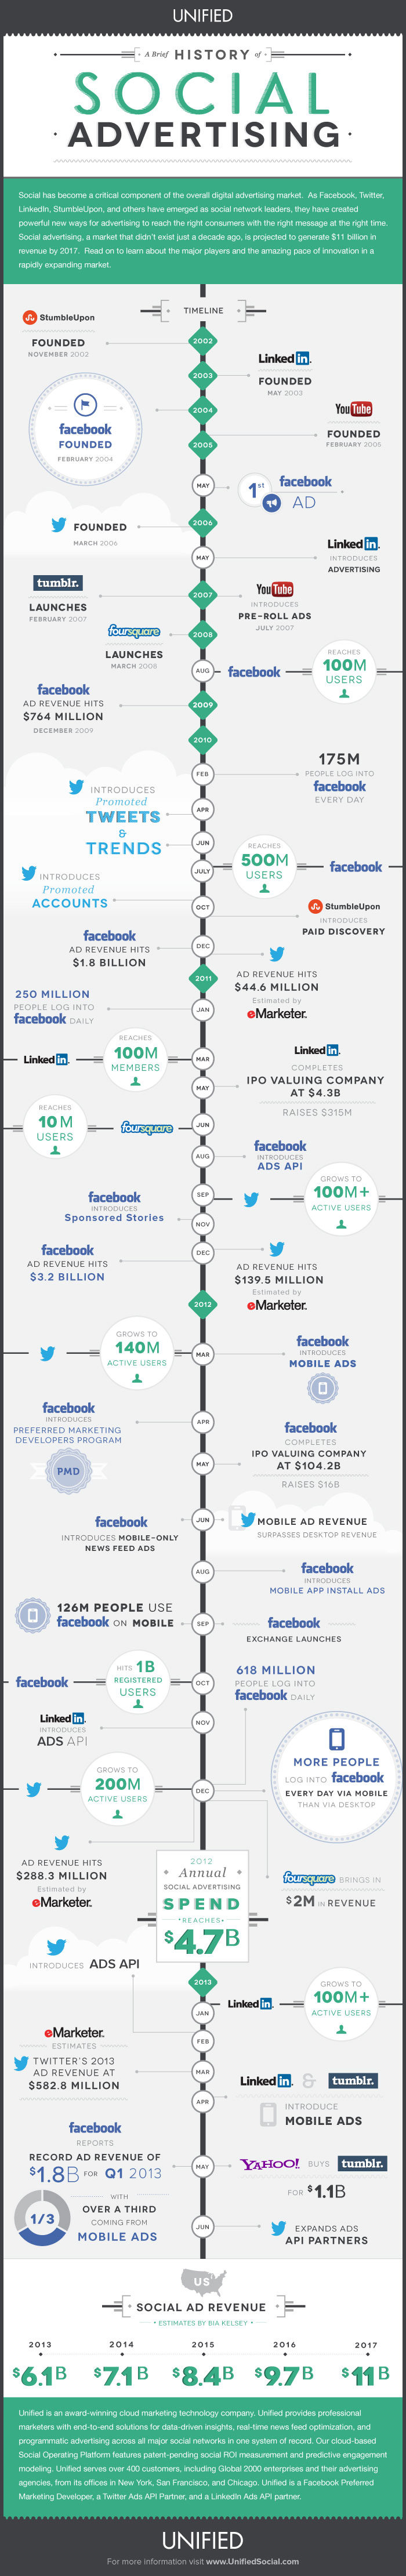 history-of-social-advertising-infographic